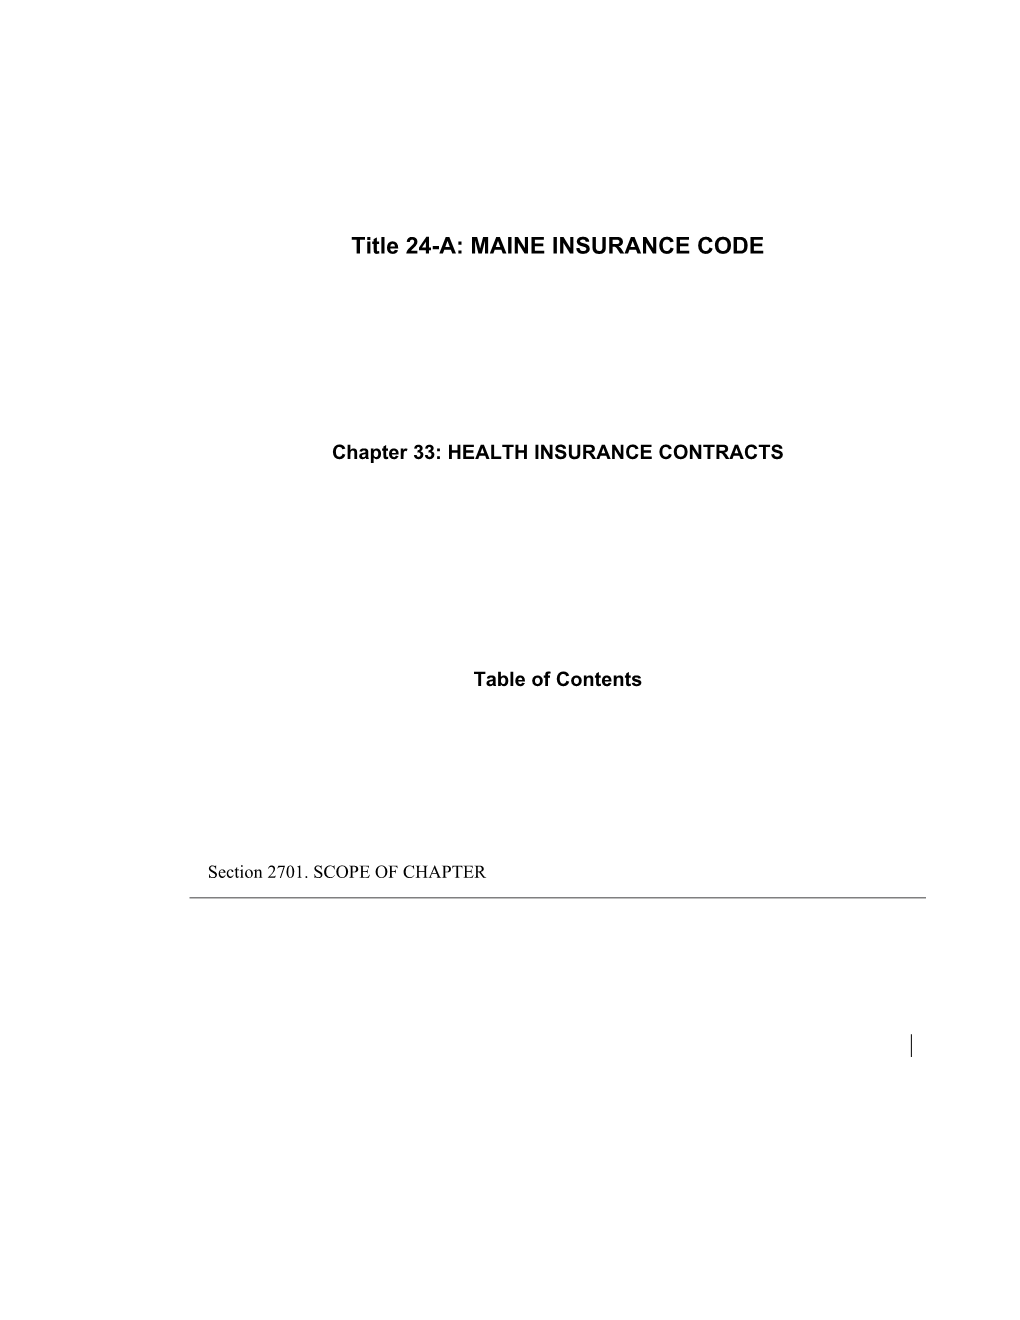 MRS Title 24-A, Chapter33: HEALTH INSURANCE CONTRACTS